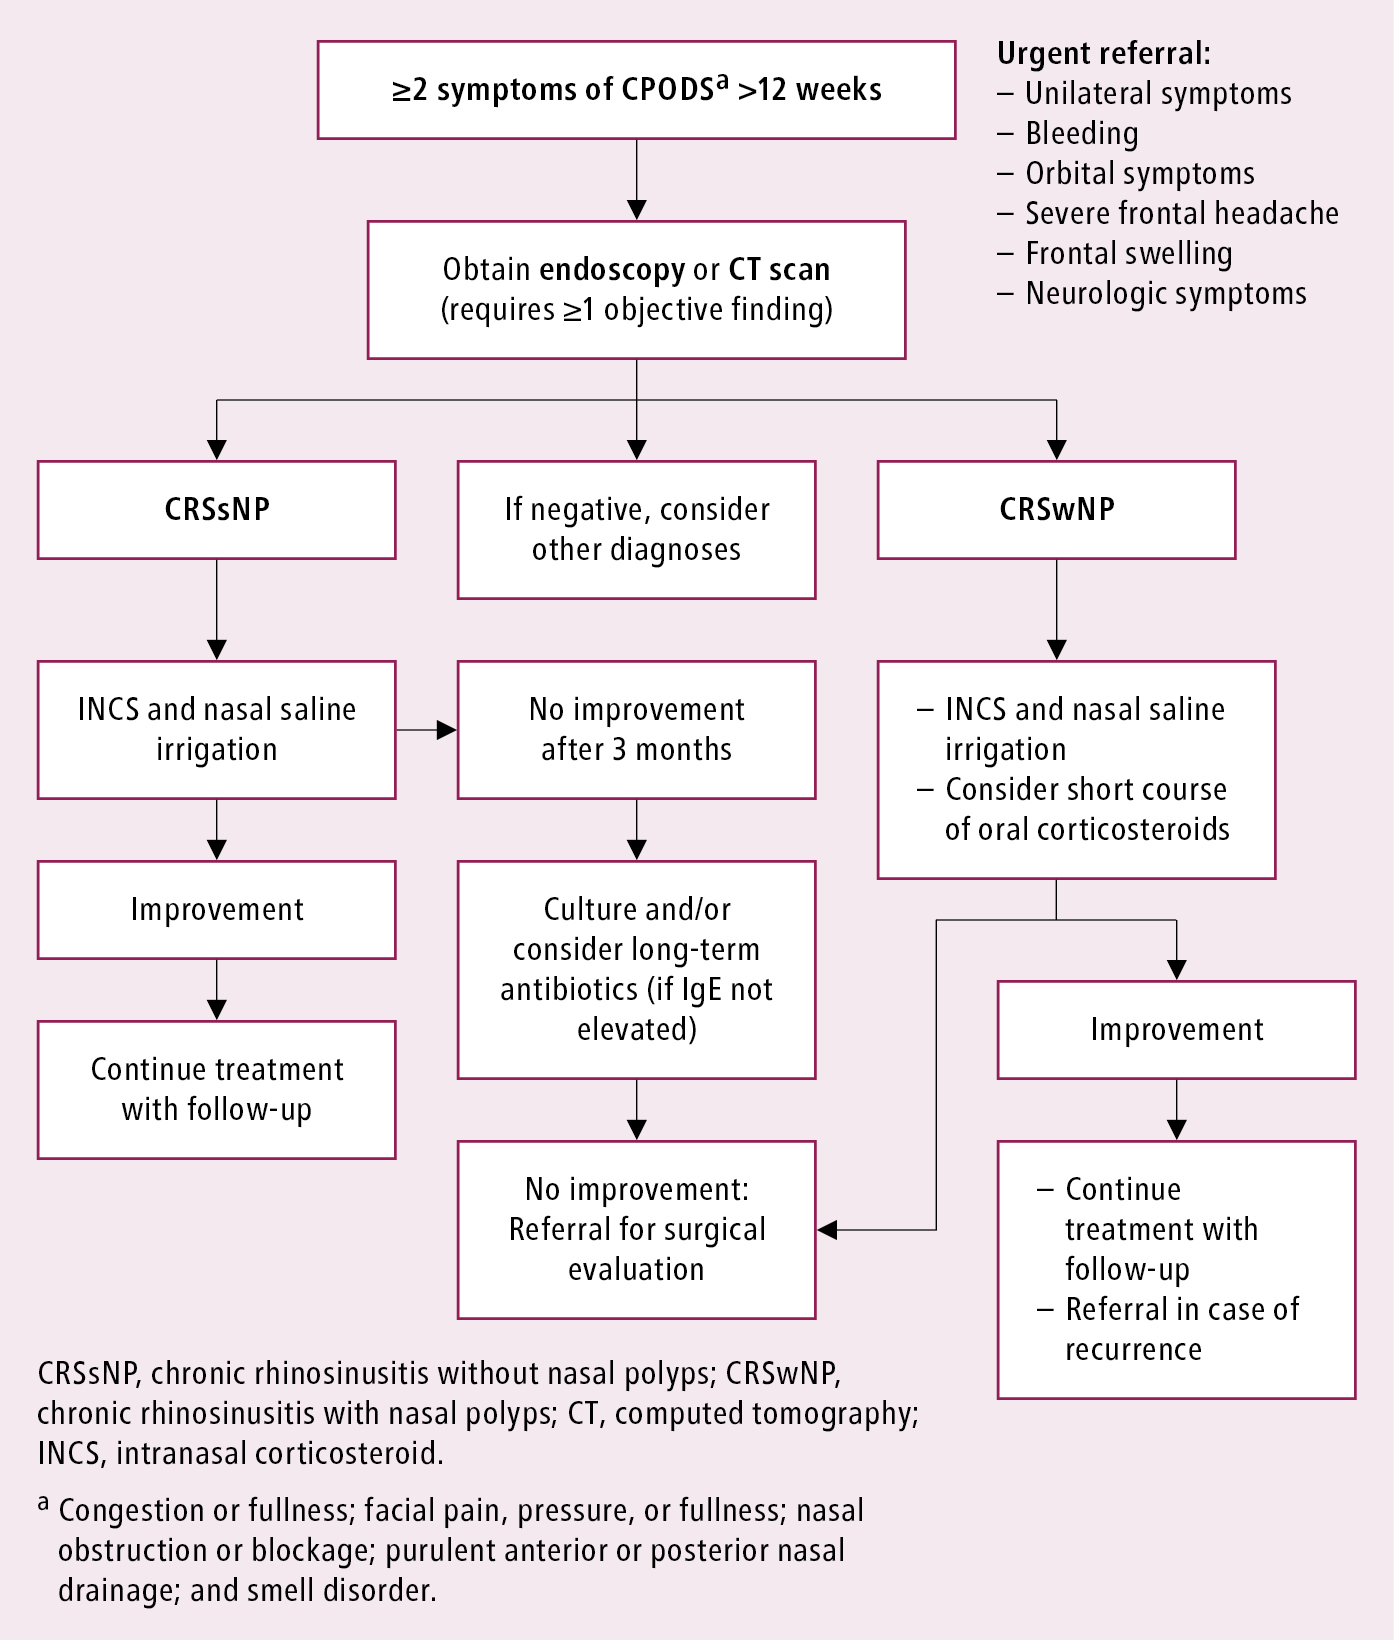 Figure 031_3381.  Management algorithm of adults with chronic rhinosinusitis.  Adapted from    Can Fam Physician. 2013;59(12):1275-81    and    Rhinology. 2012;50(1):1-12   .  